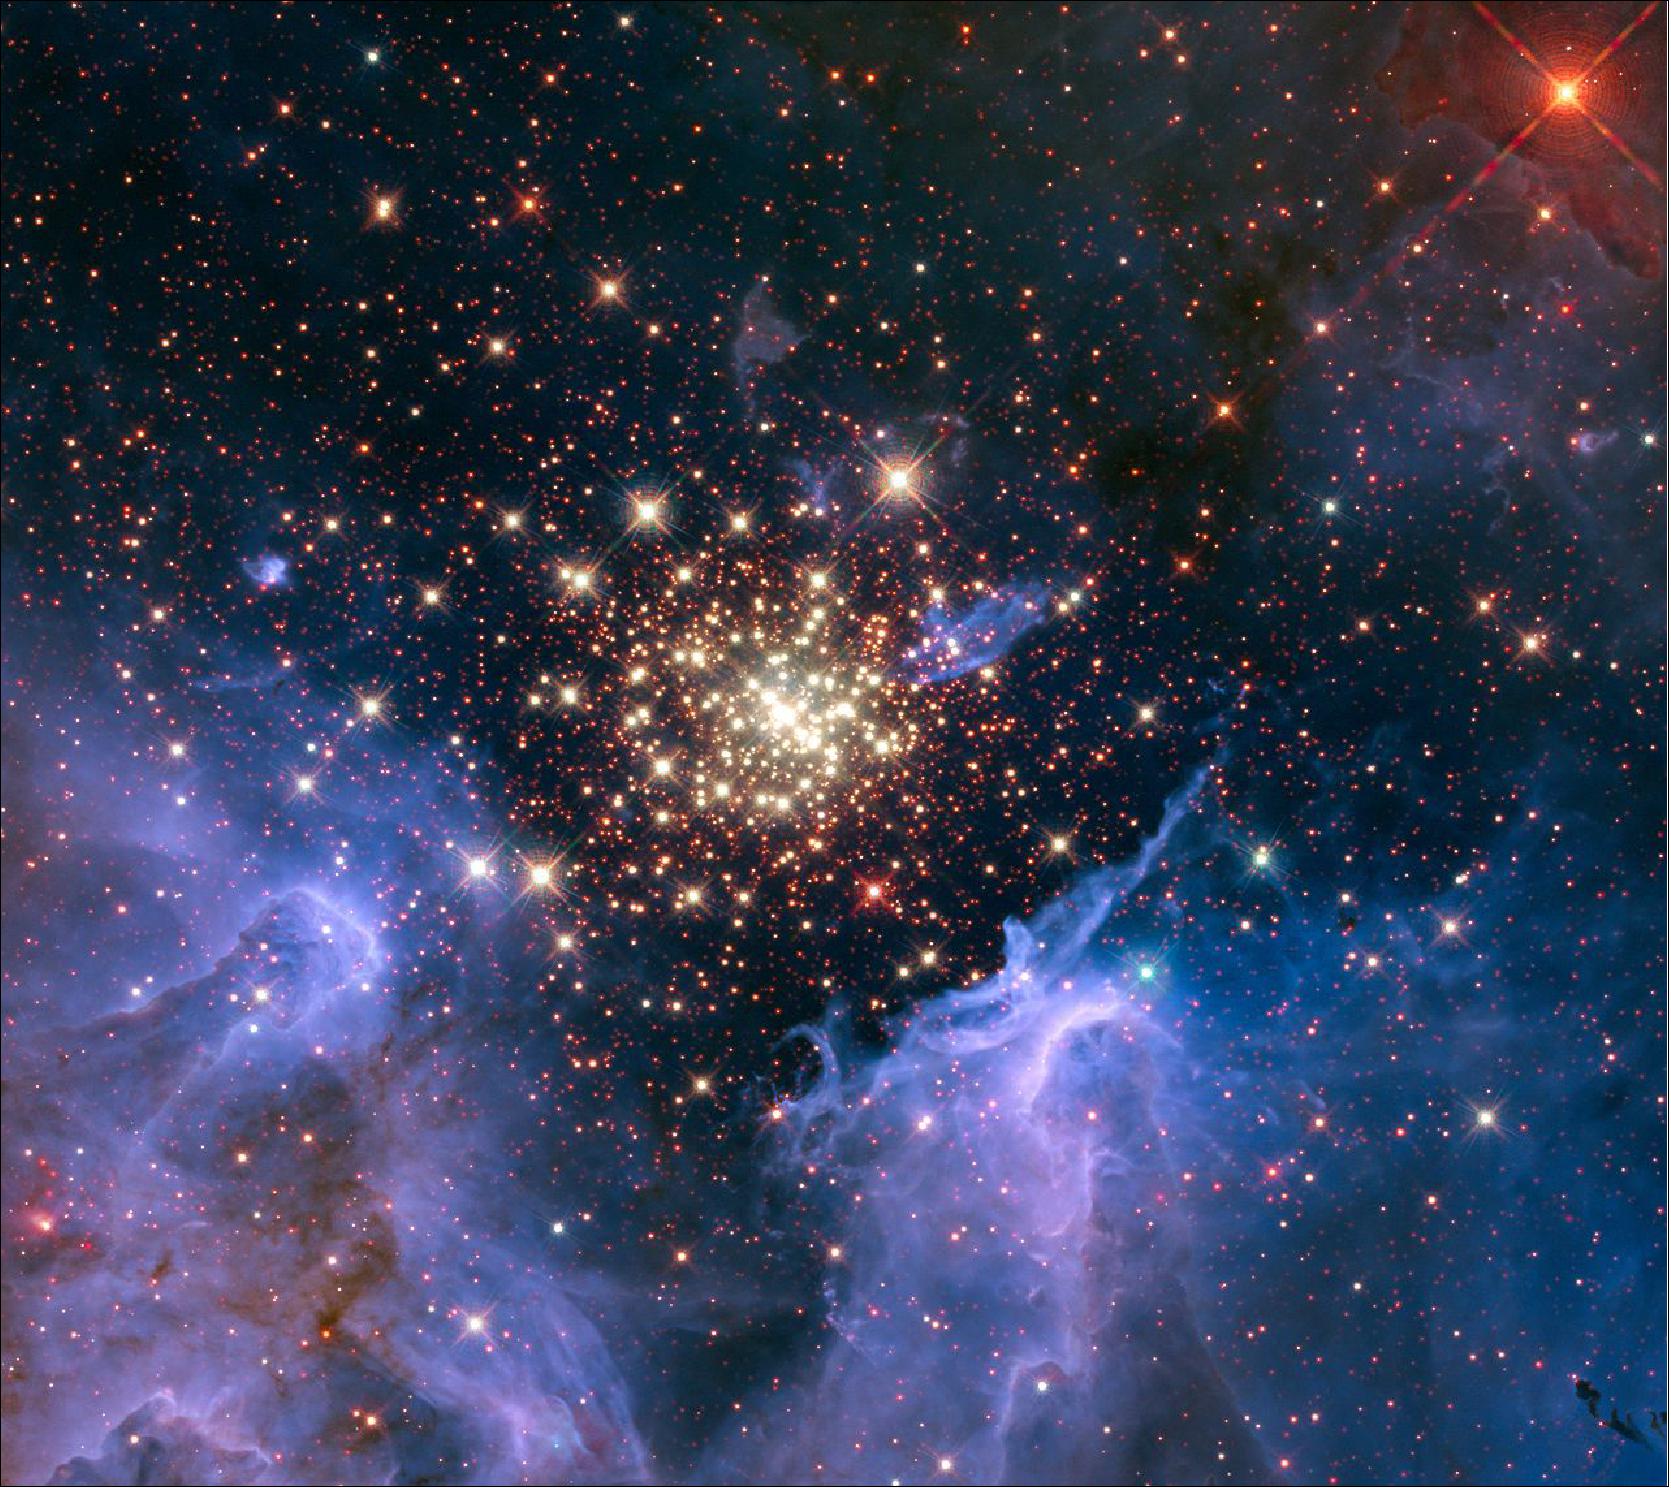 Figure 9: A cluster of massive stars seen with the Hubble Space Telescope. The cluster is surrounded by clouds of interstellar gas and dust called a nebula. The nebula, located 20,000 light-years away in the constellation Carina, contains the central cluster of huge, hot stars, called NGC 3603. Recent research shows that galactic cosmic rays flowing into our solar system originate in clusters like these 8image credit: NASA/U. Virginia/INAF, Bologna, Italy/USRA/Ames/STScI/AURA)